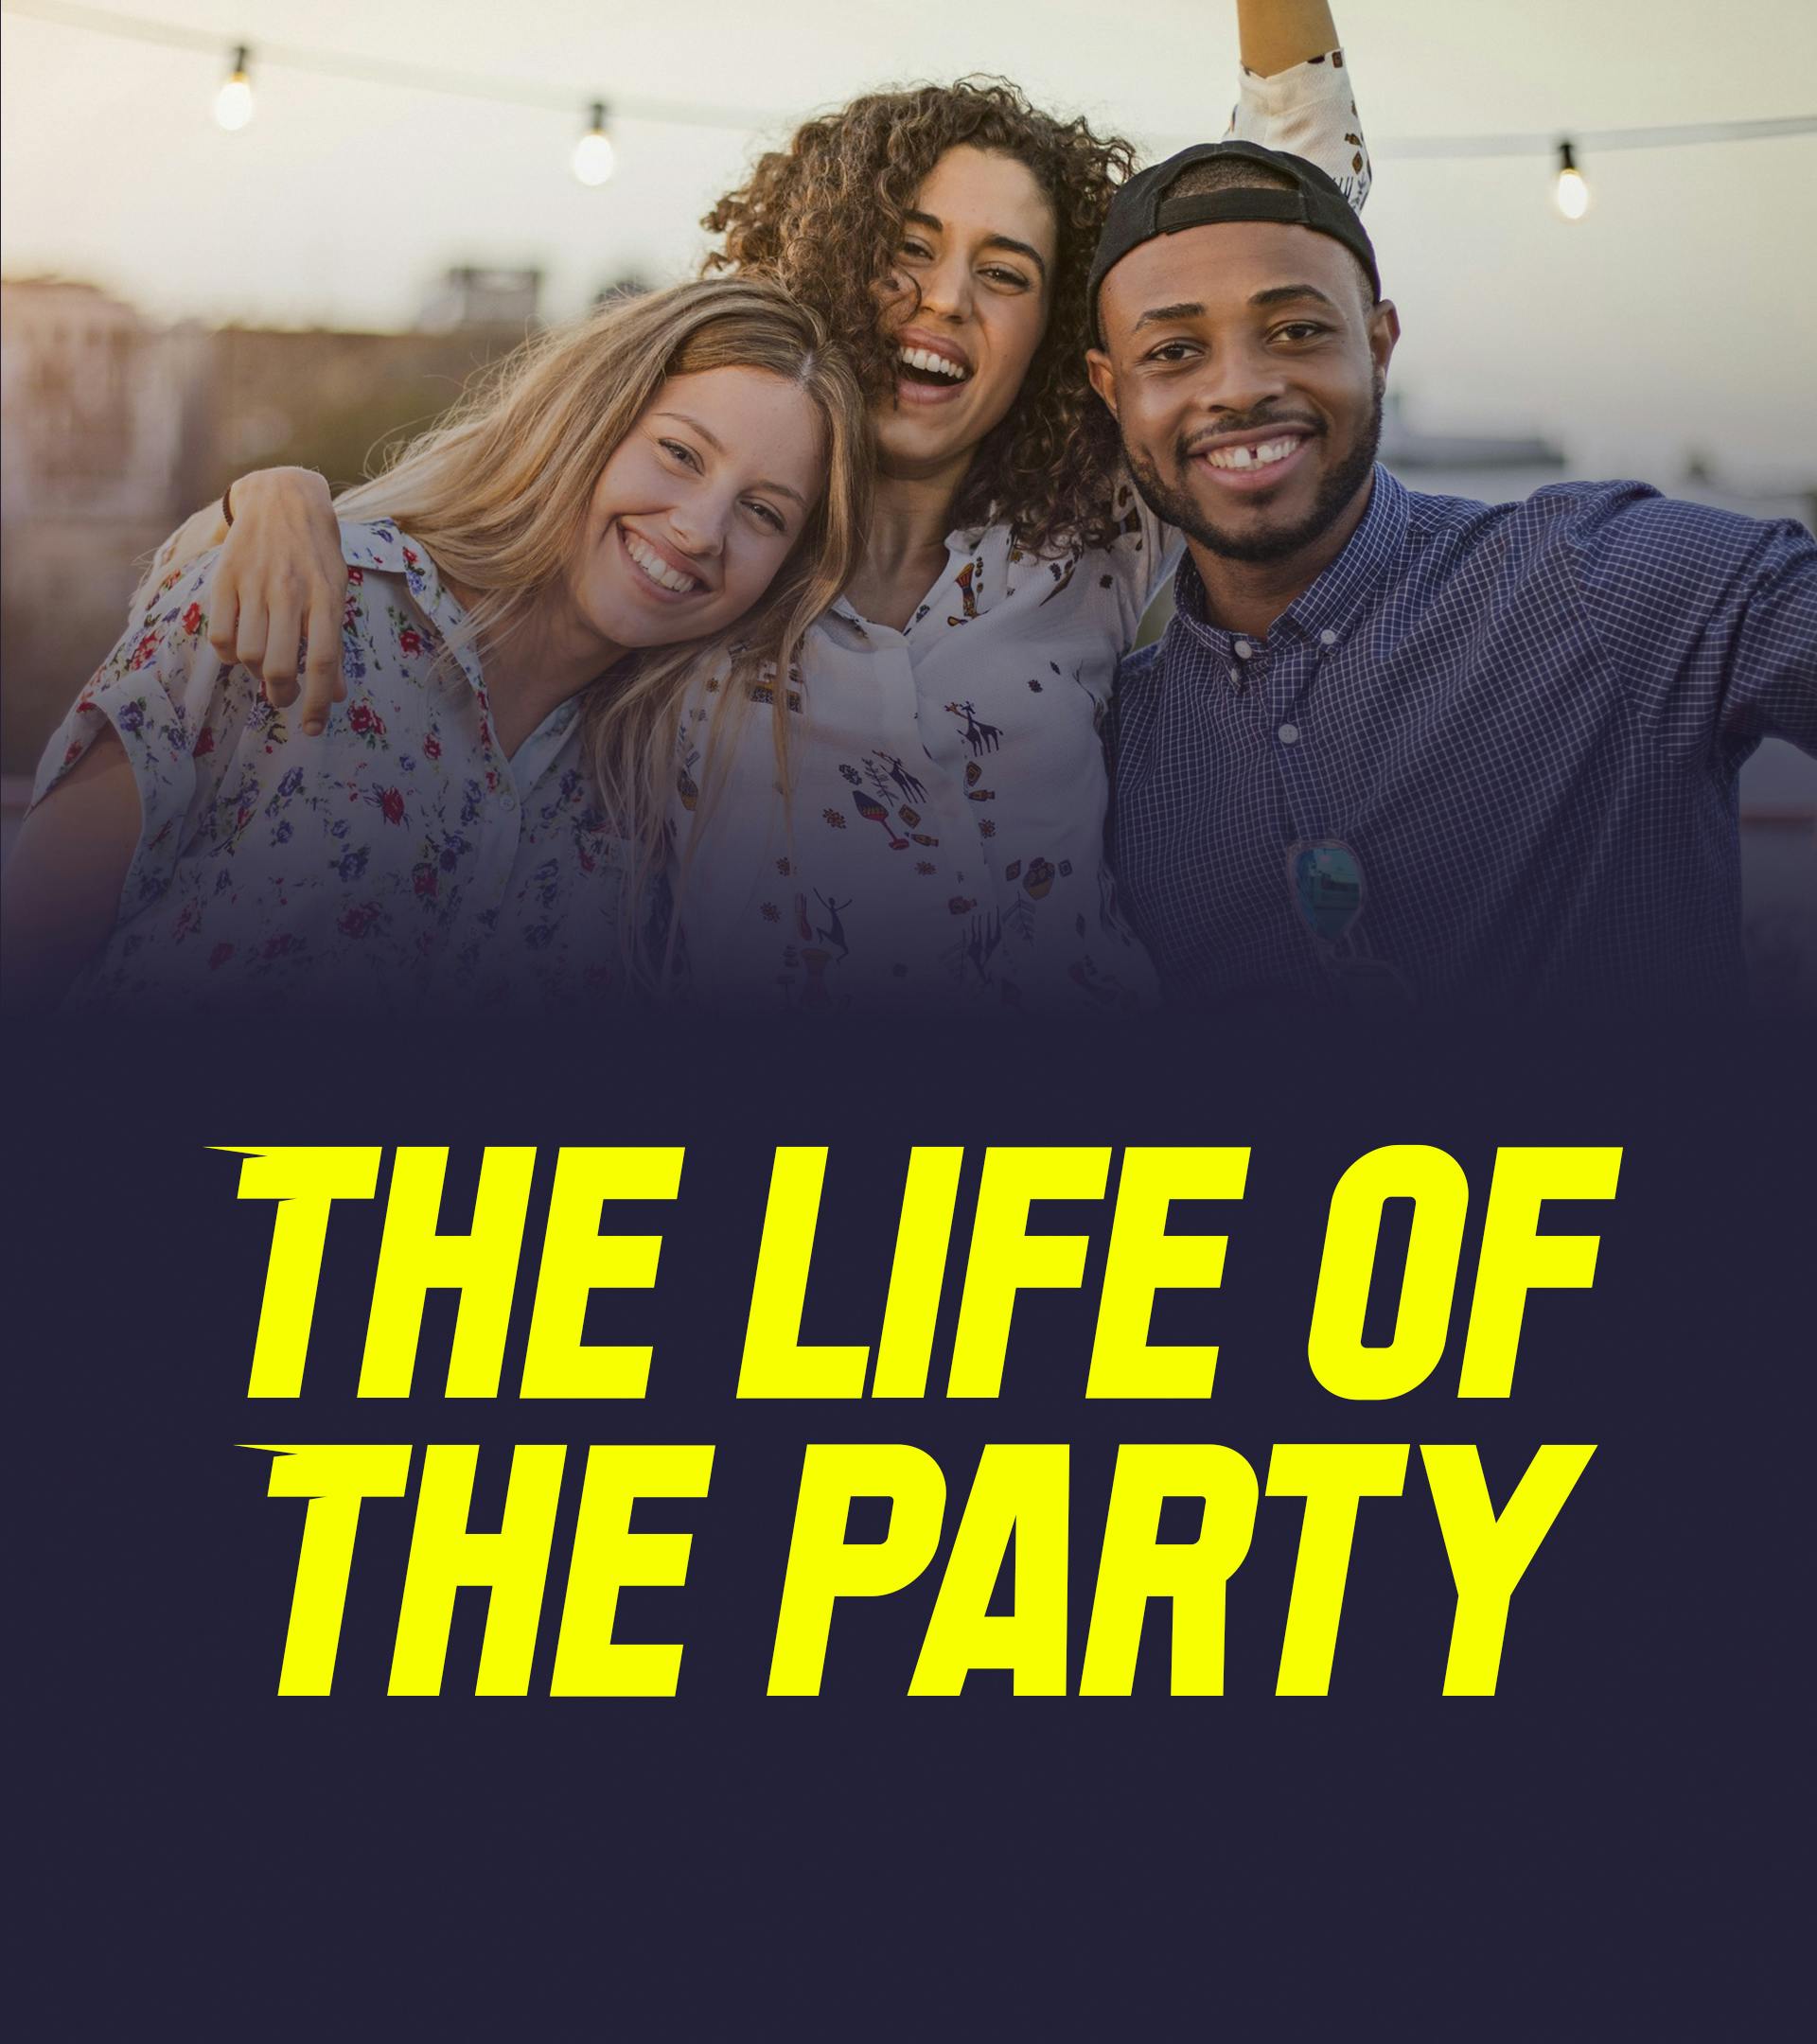 Social Media graphic for Sonic Bunny that says "The life of the party" with a group of 3 people smilling.